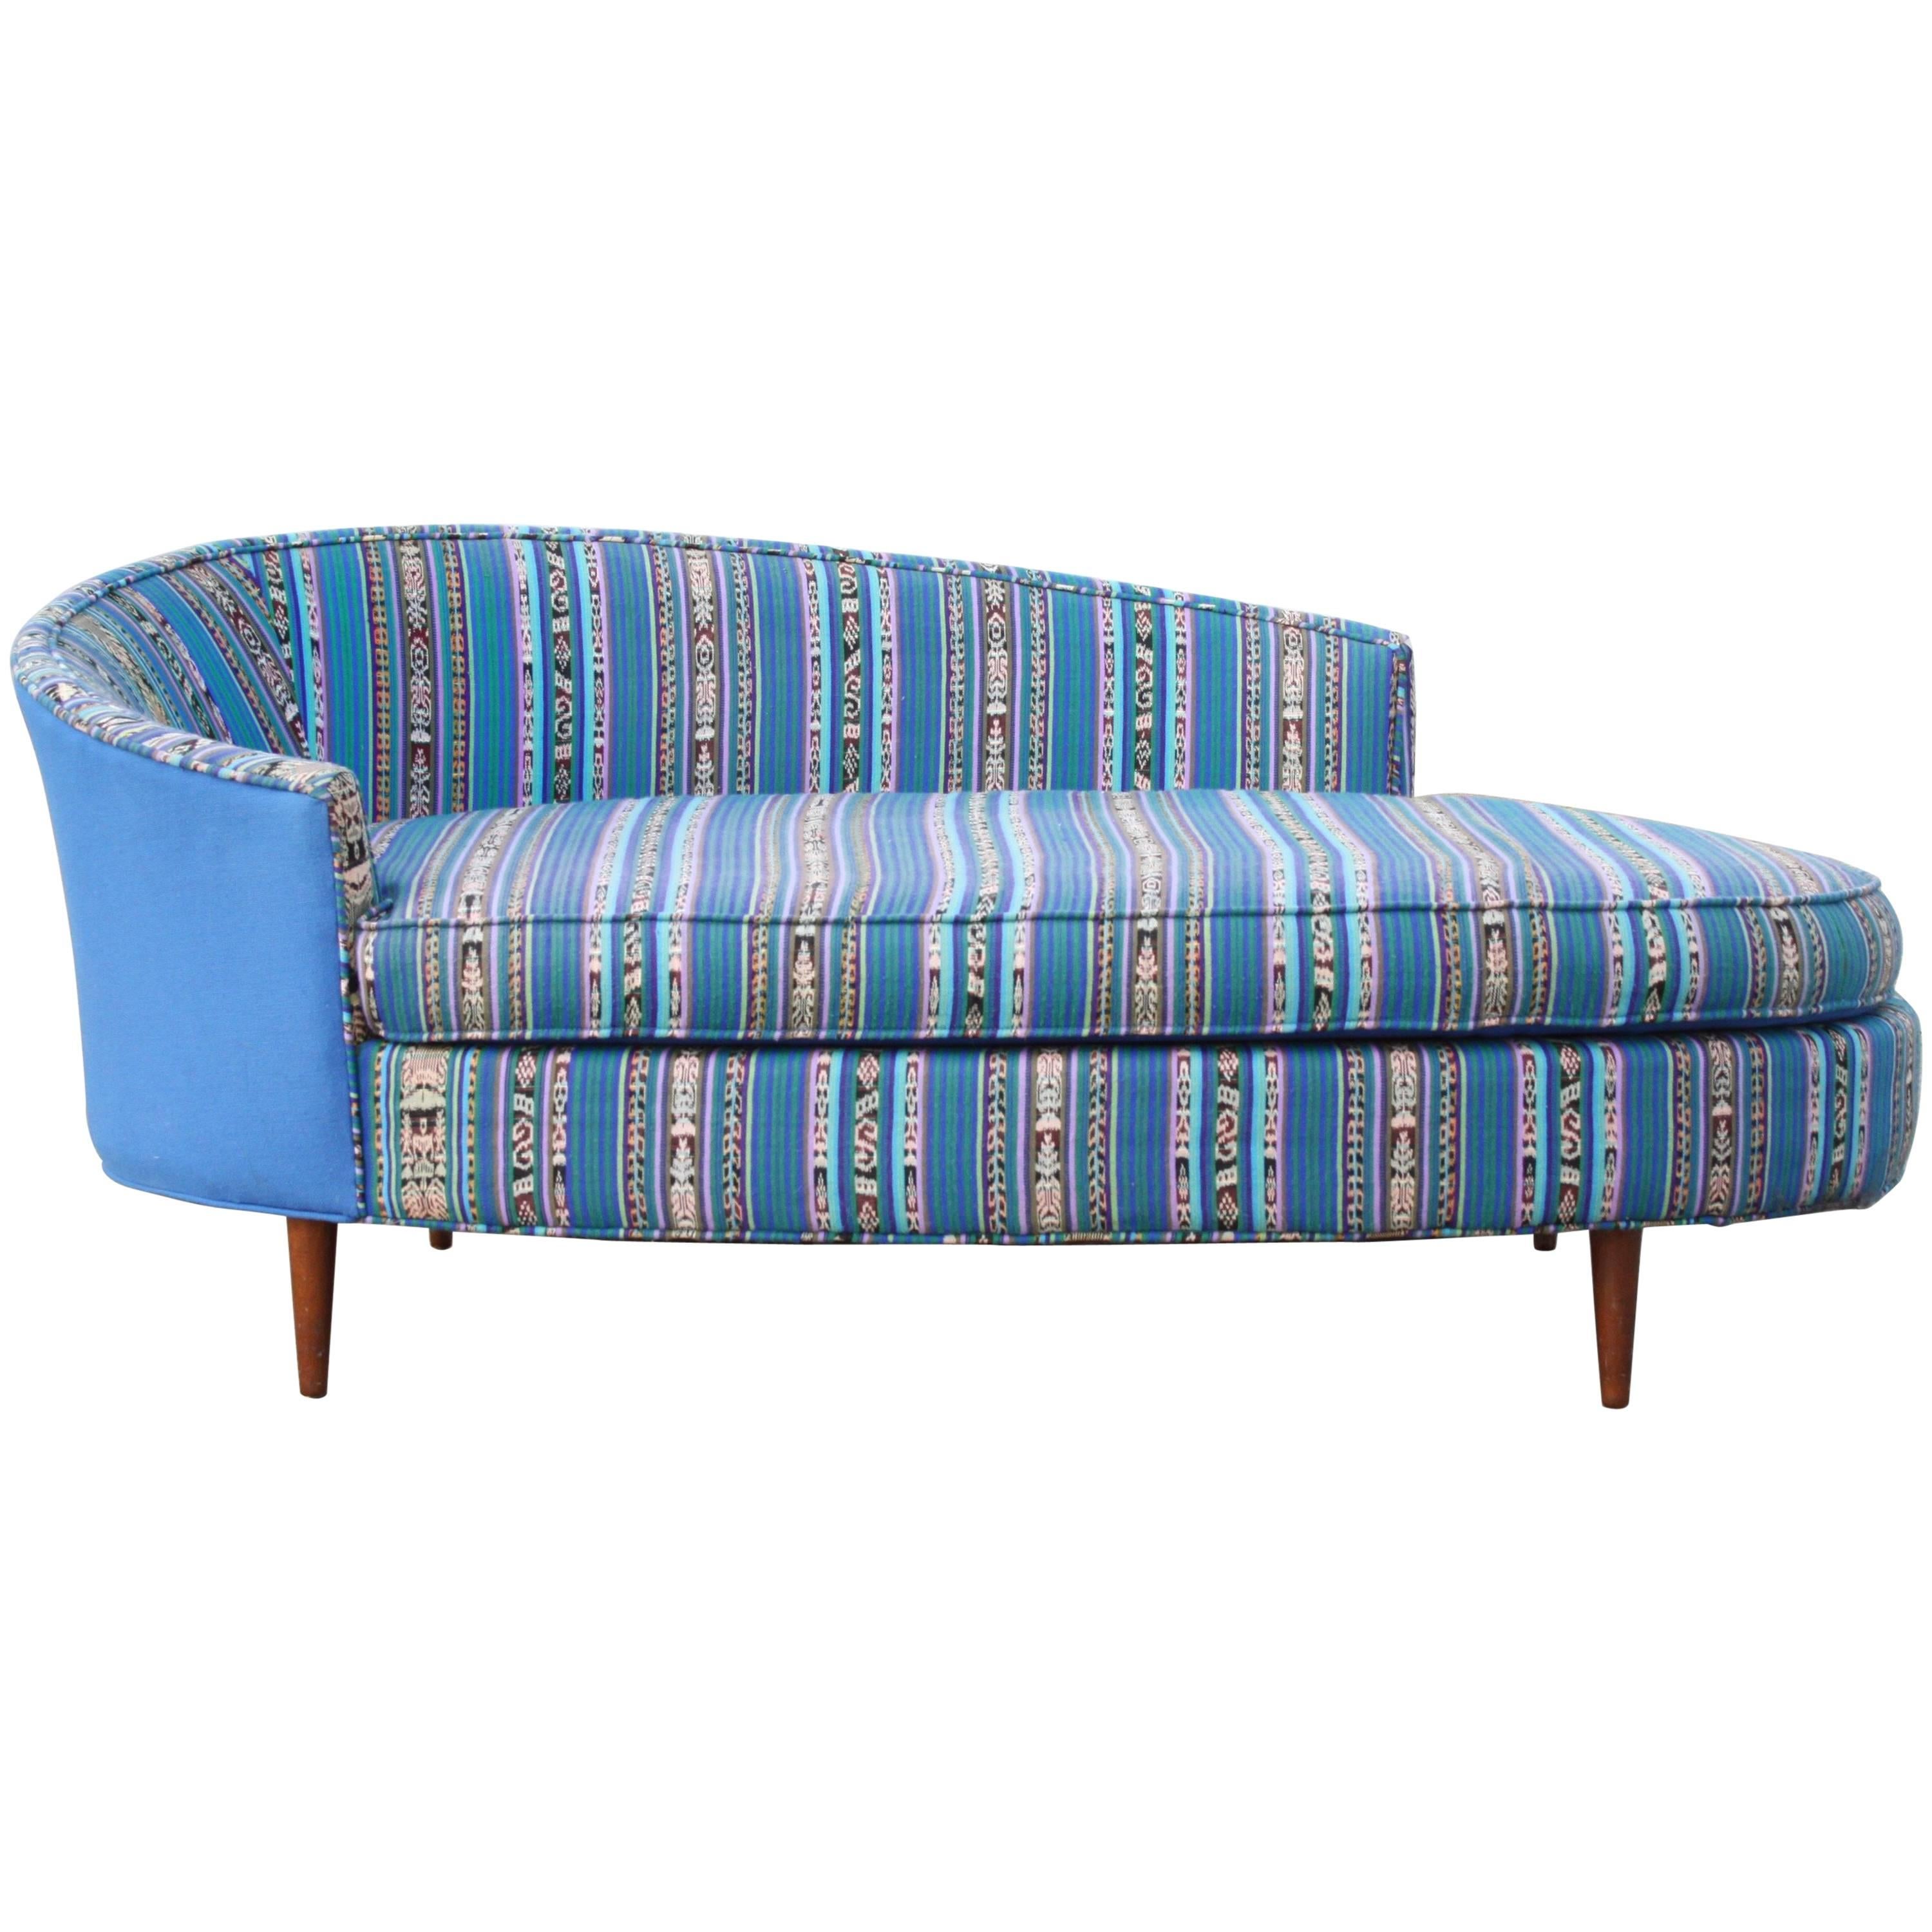 Adrian Pearsall Oval Chaise Lounge Settee